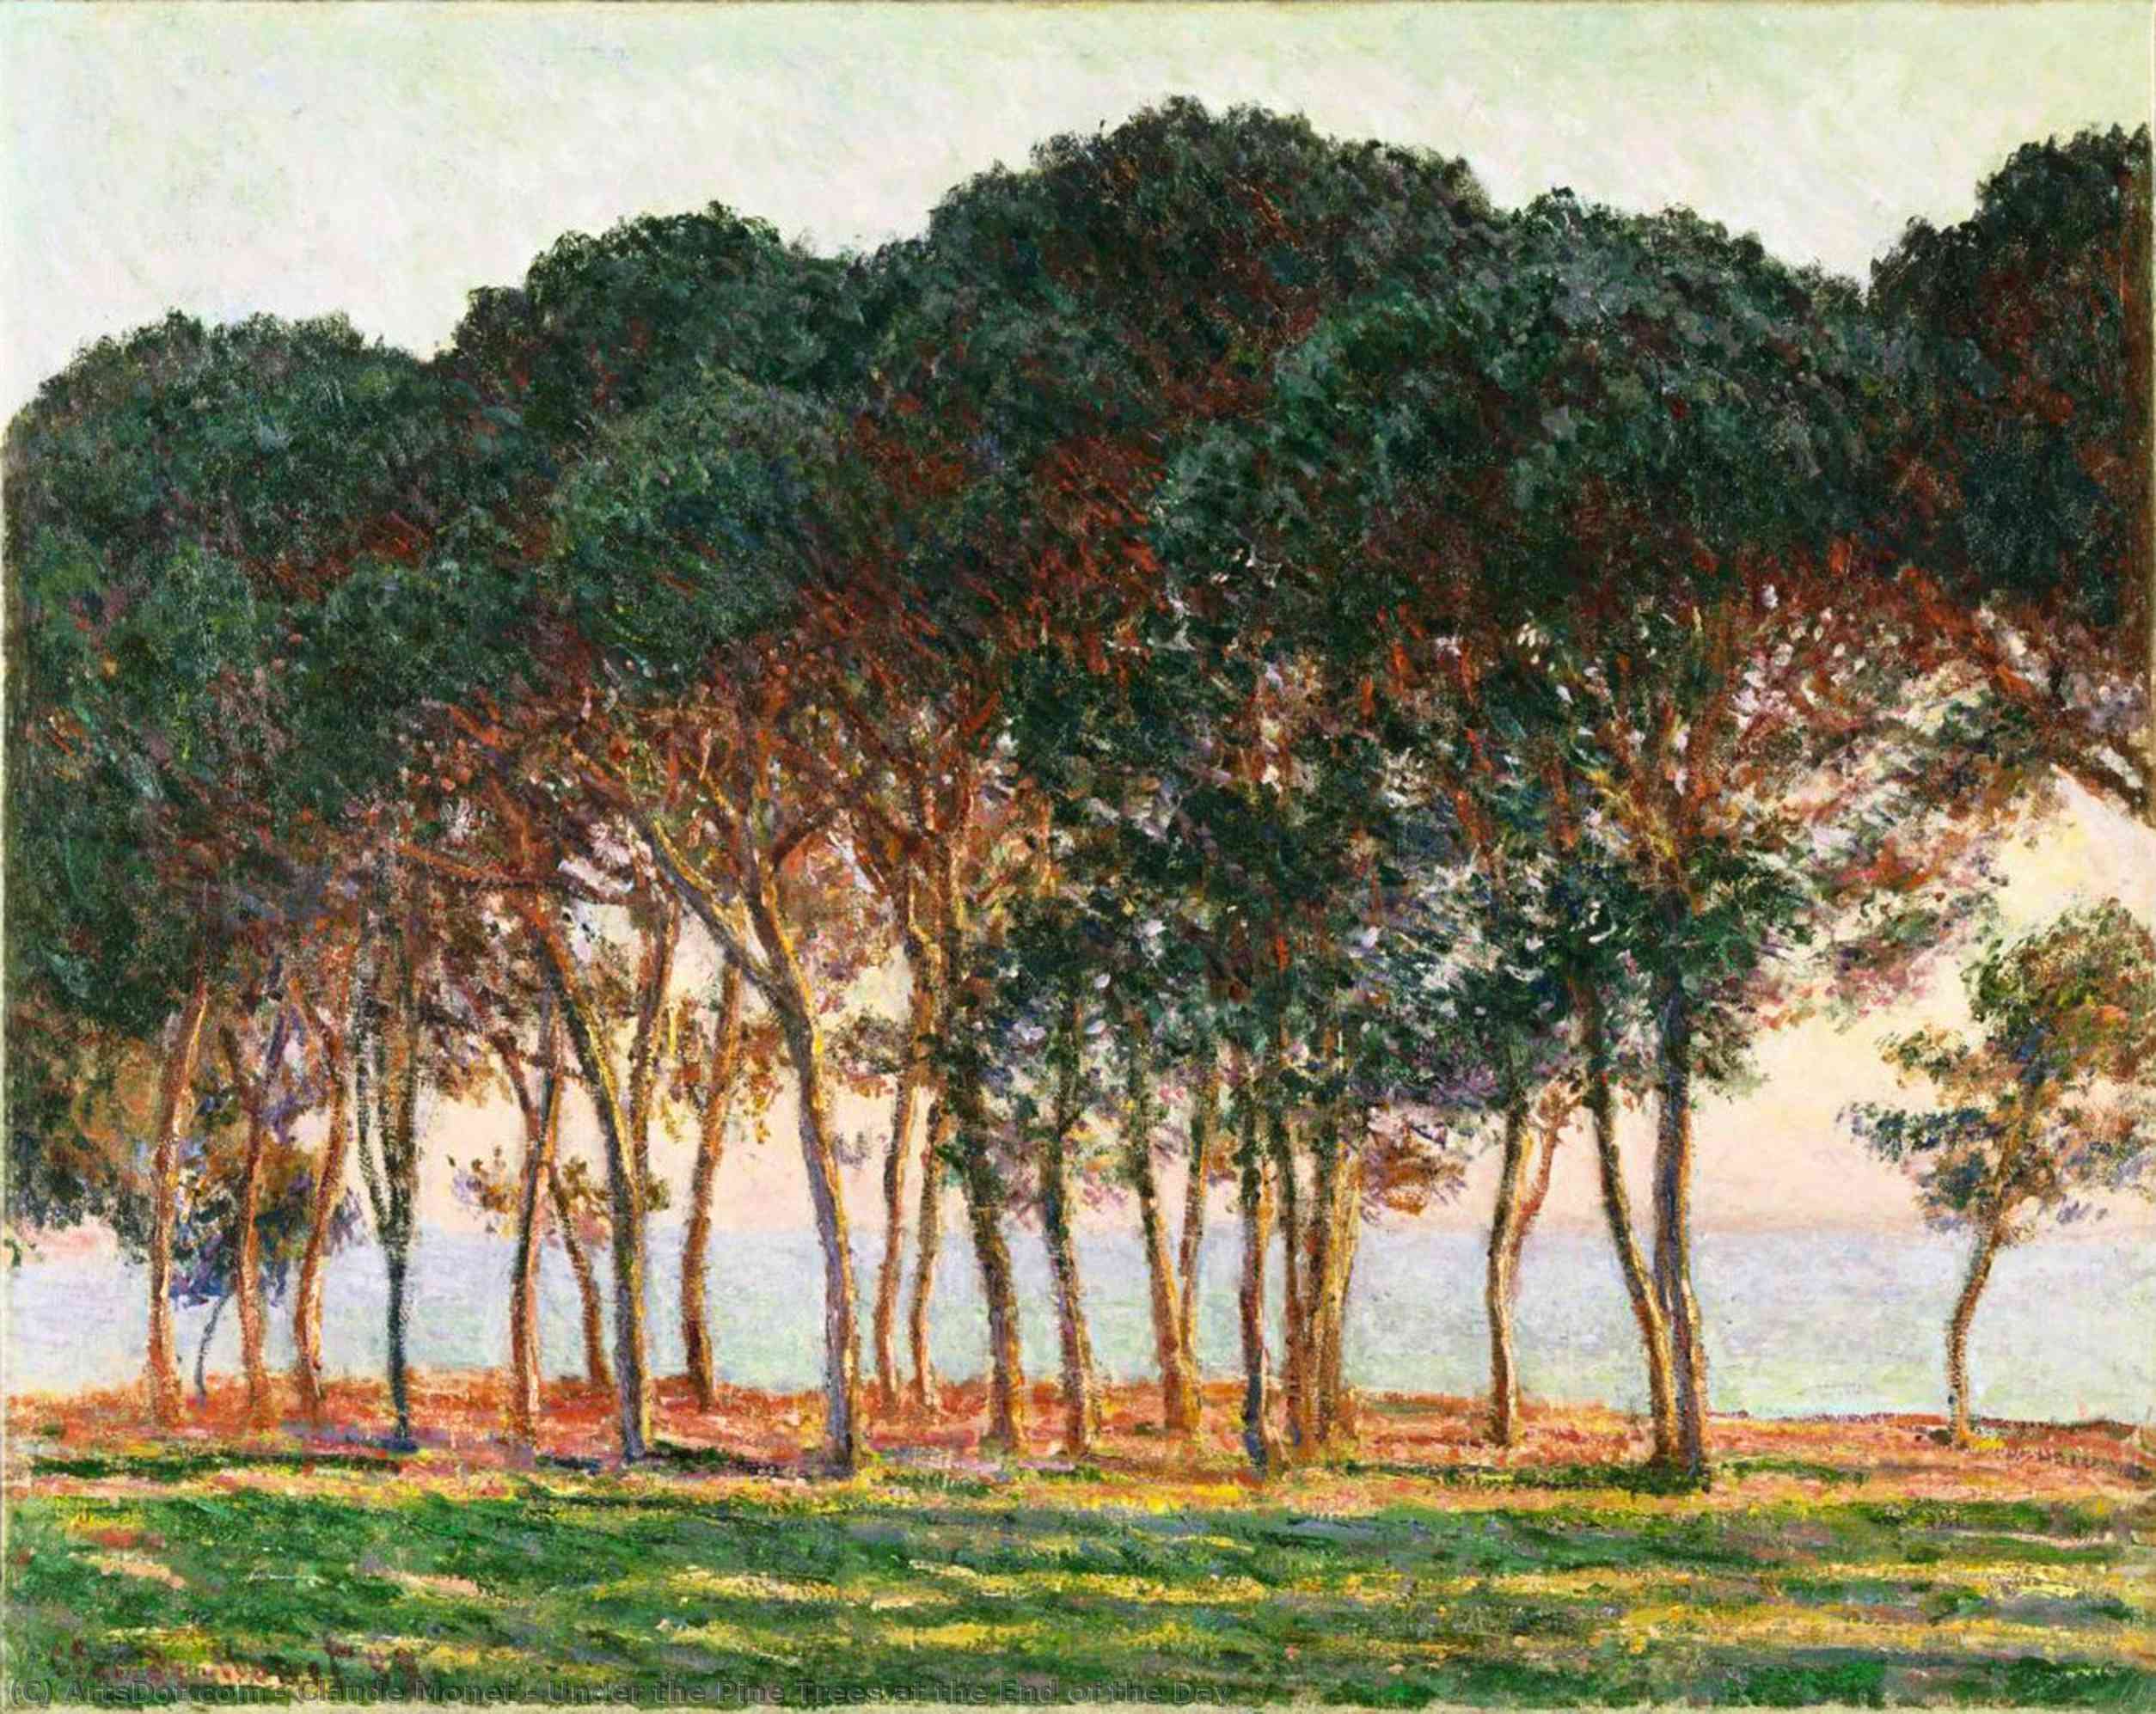 Order Art Reproductions Under the Pine Trees at the End of the Day, 1888 by Claude Monet (1840-1926, France) | ArtsDot.com